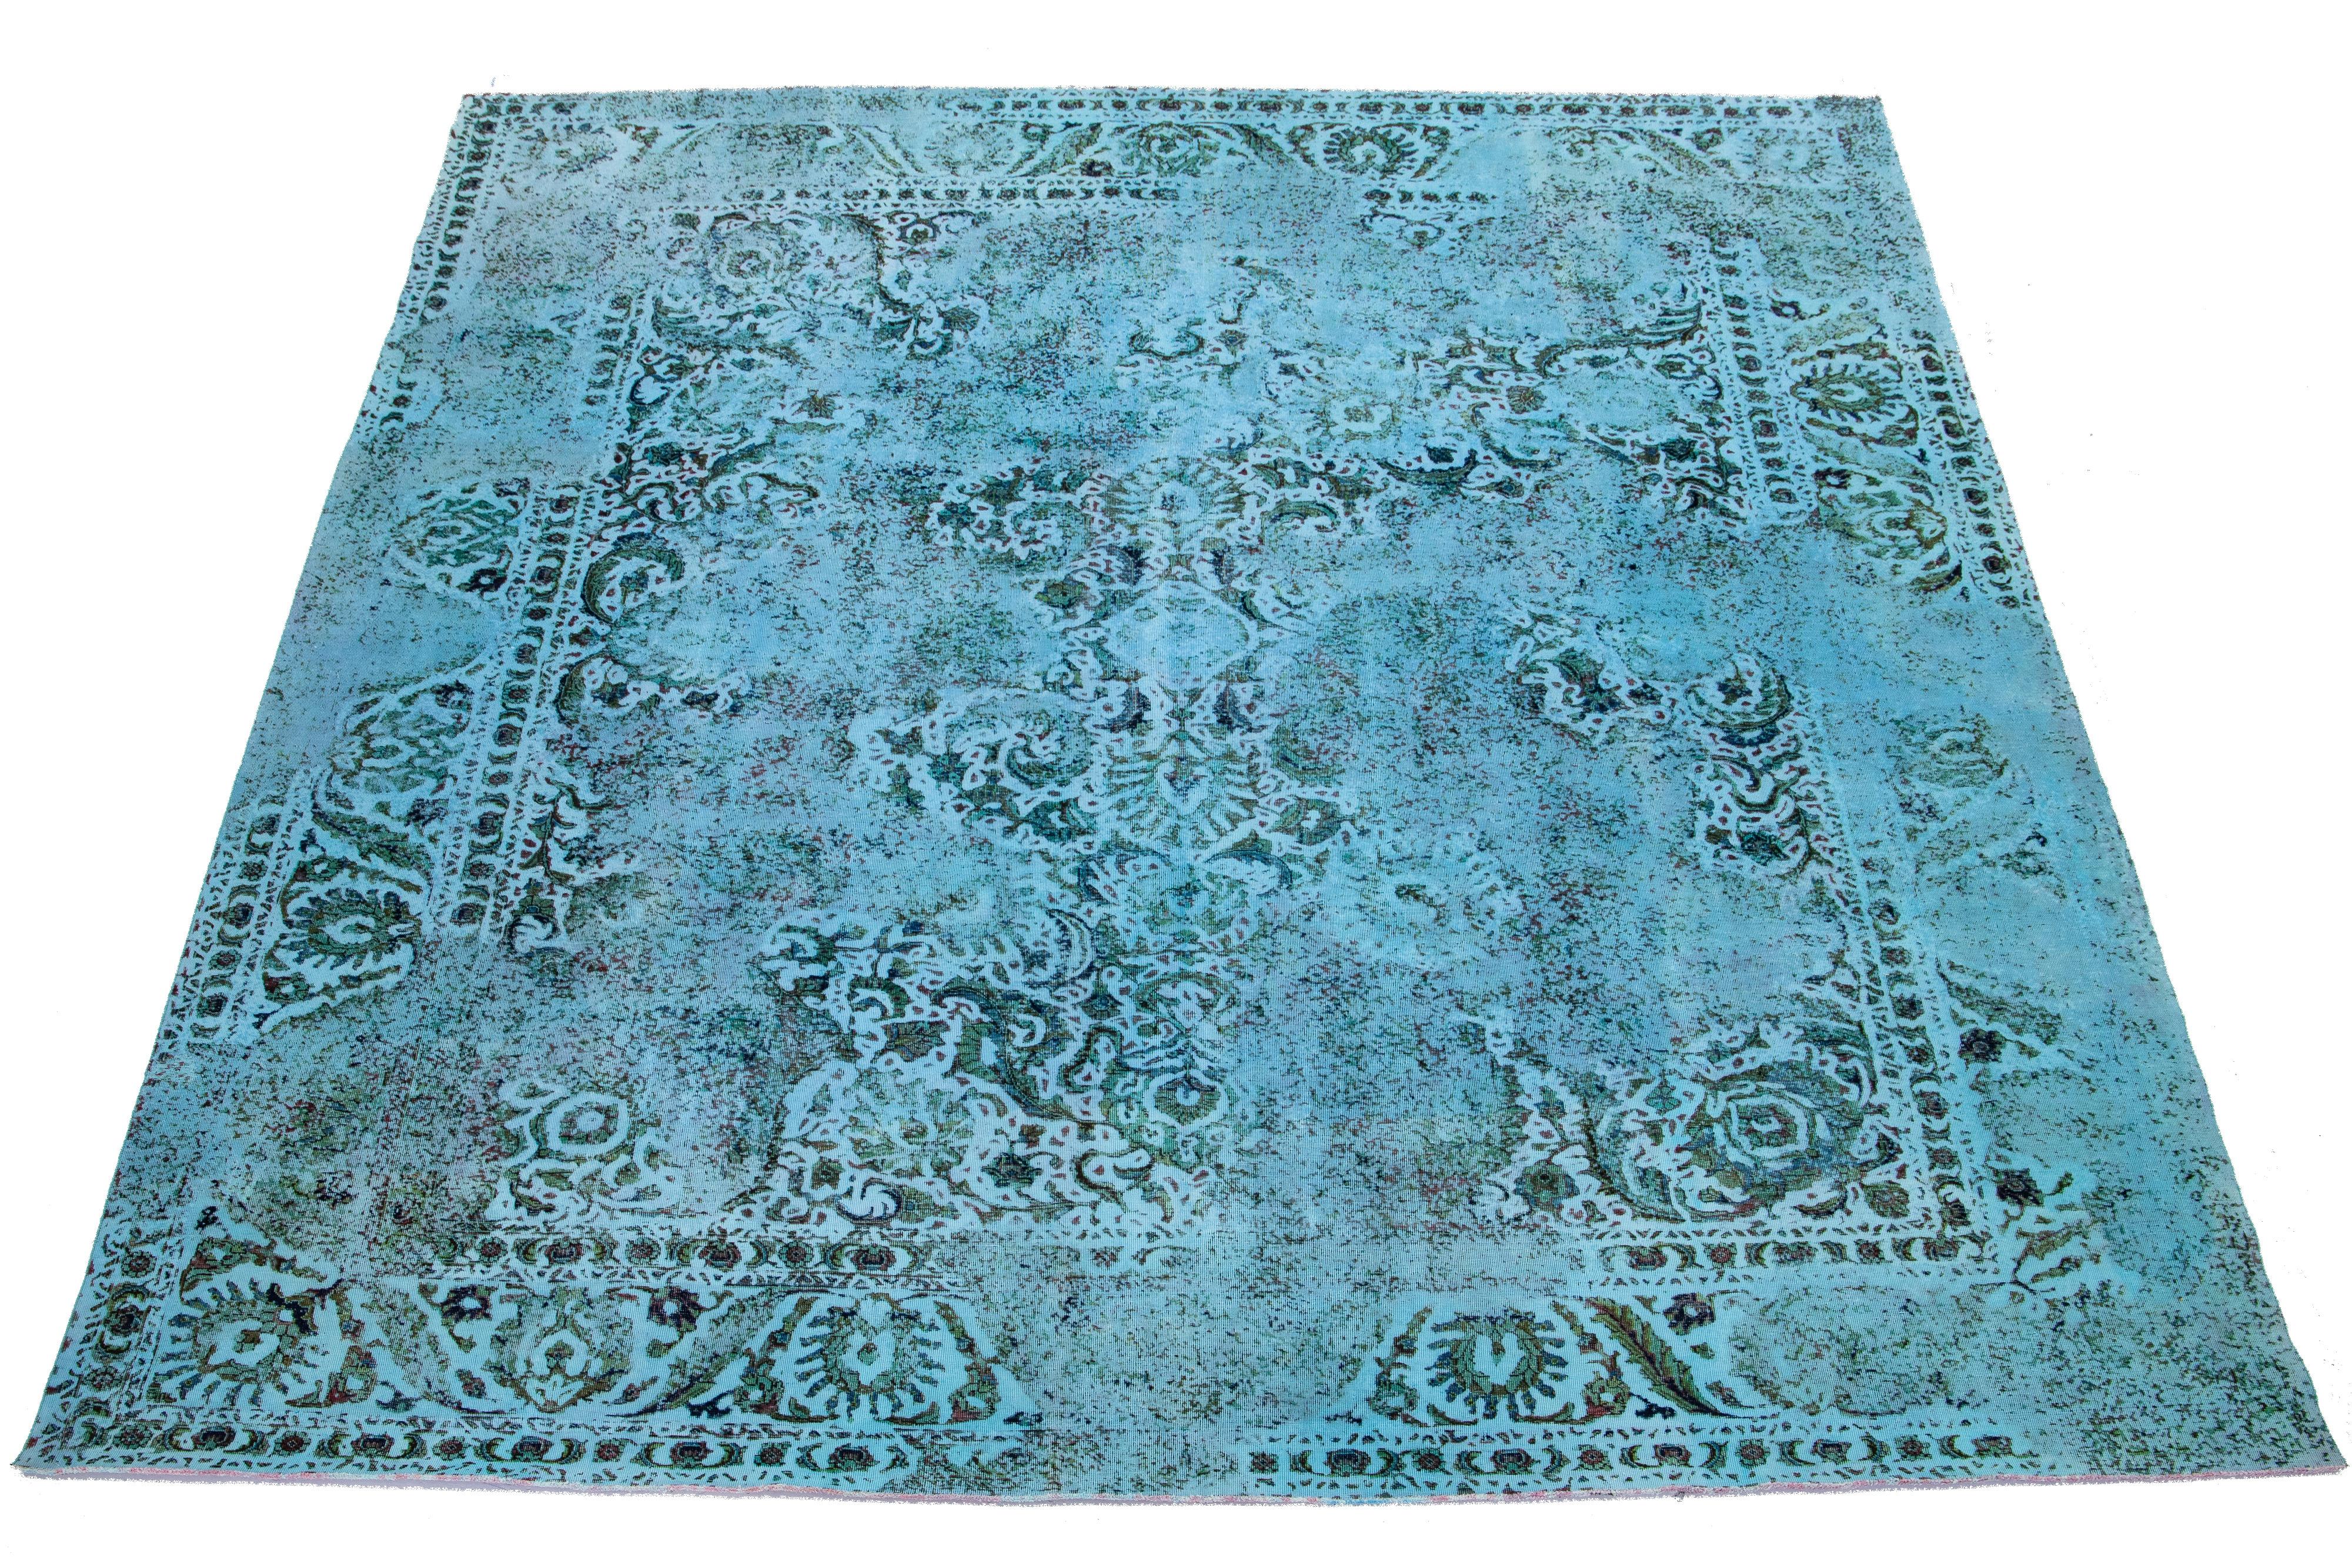 This is a blue antique hand-knotted Persian wool rug with an all-over floral design and gray accents.

This rug measures 11'3'' x 13'5